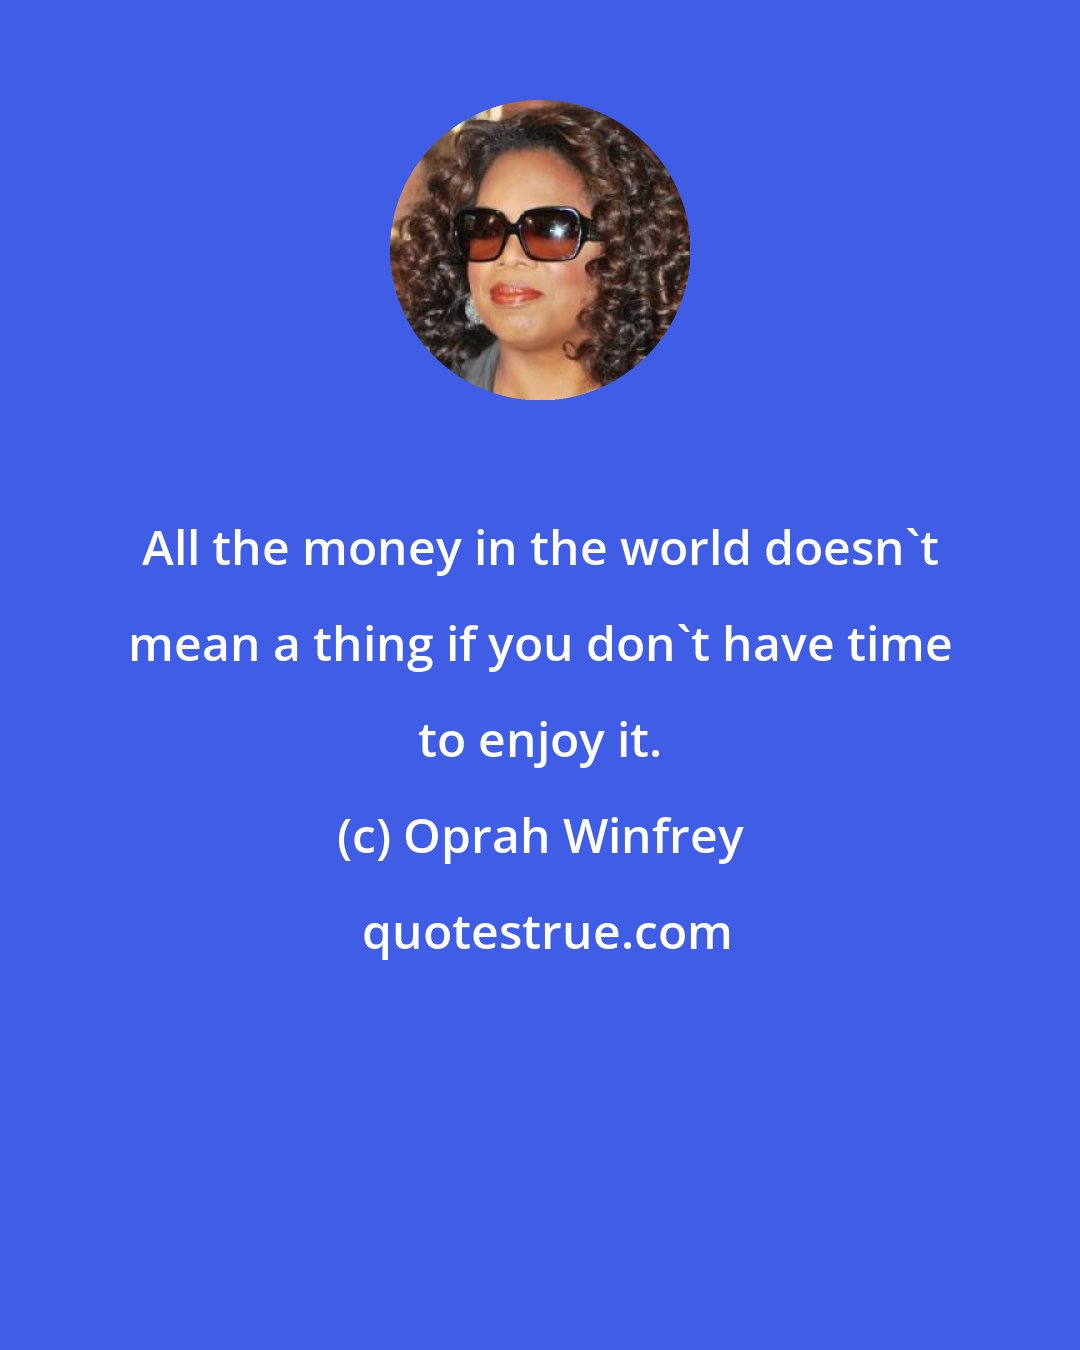 Oprah Winfrey: All the money in the world doesn't mean a thing if you don't have time to enjoy it.